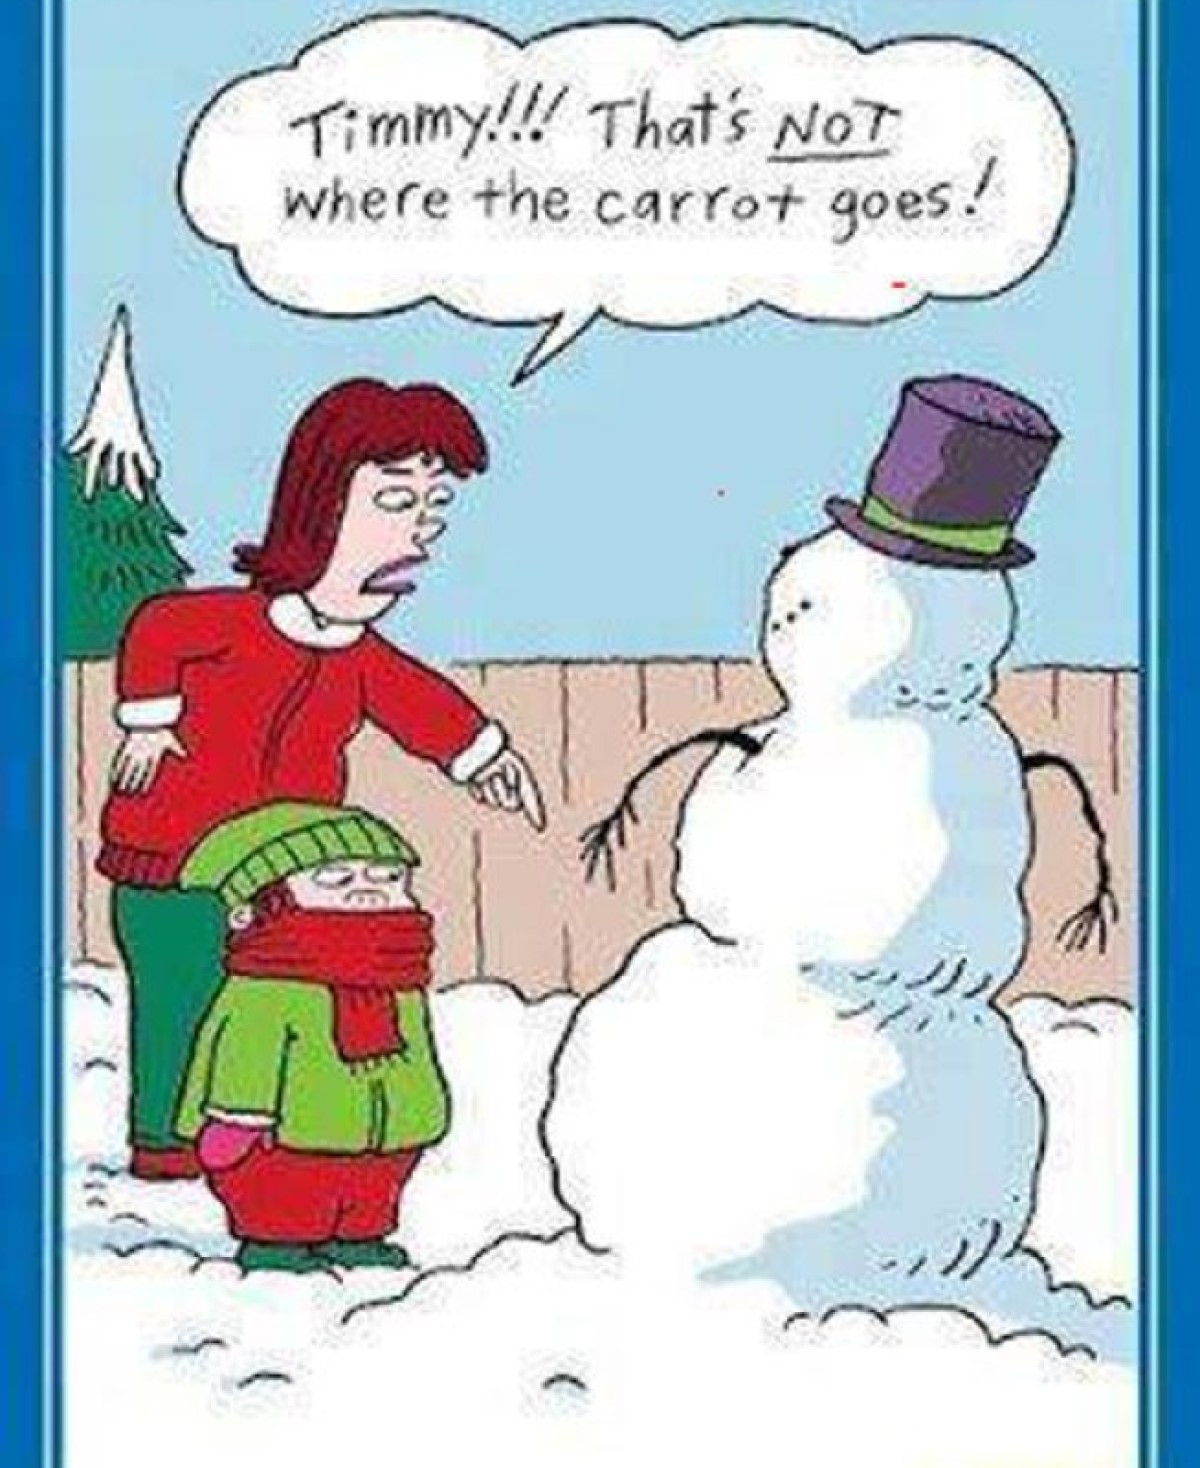 Misplaced Carrot funny snowman image